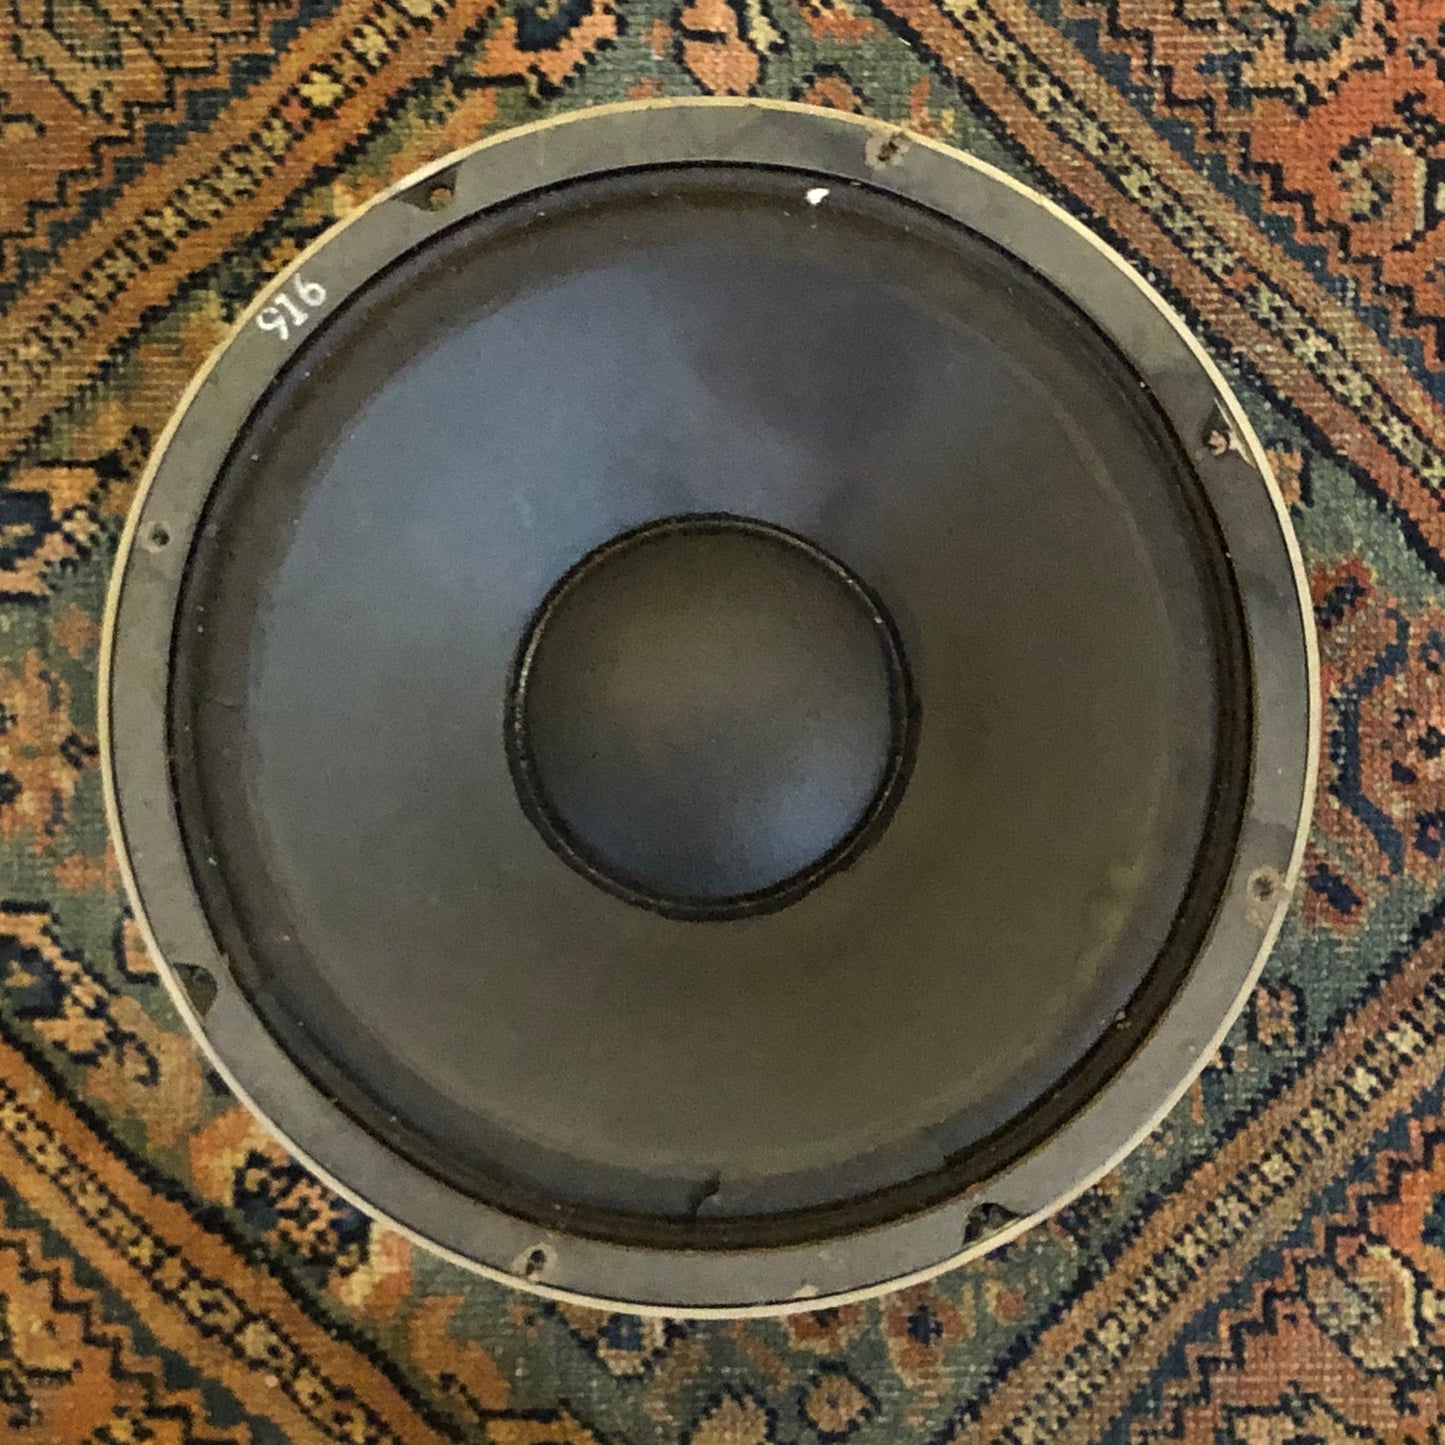 Vintage Electro-Voice SRO/12 12" Alnico "Coffee Can" Speaker As-Is For Repair